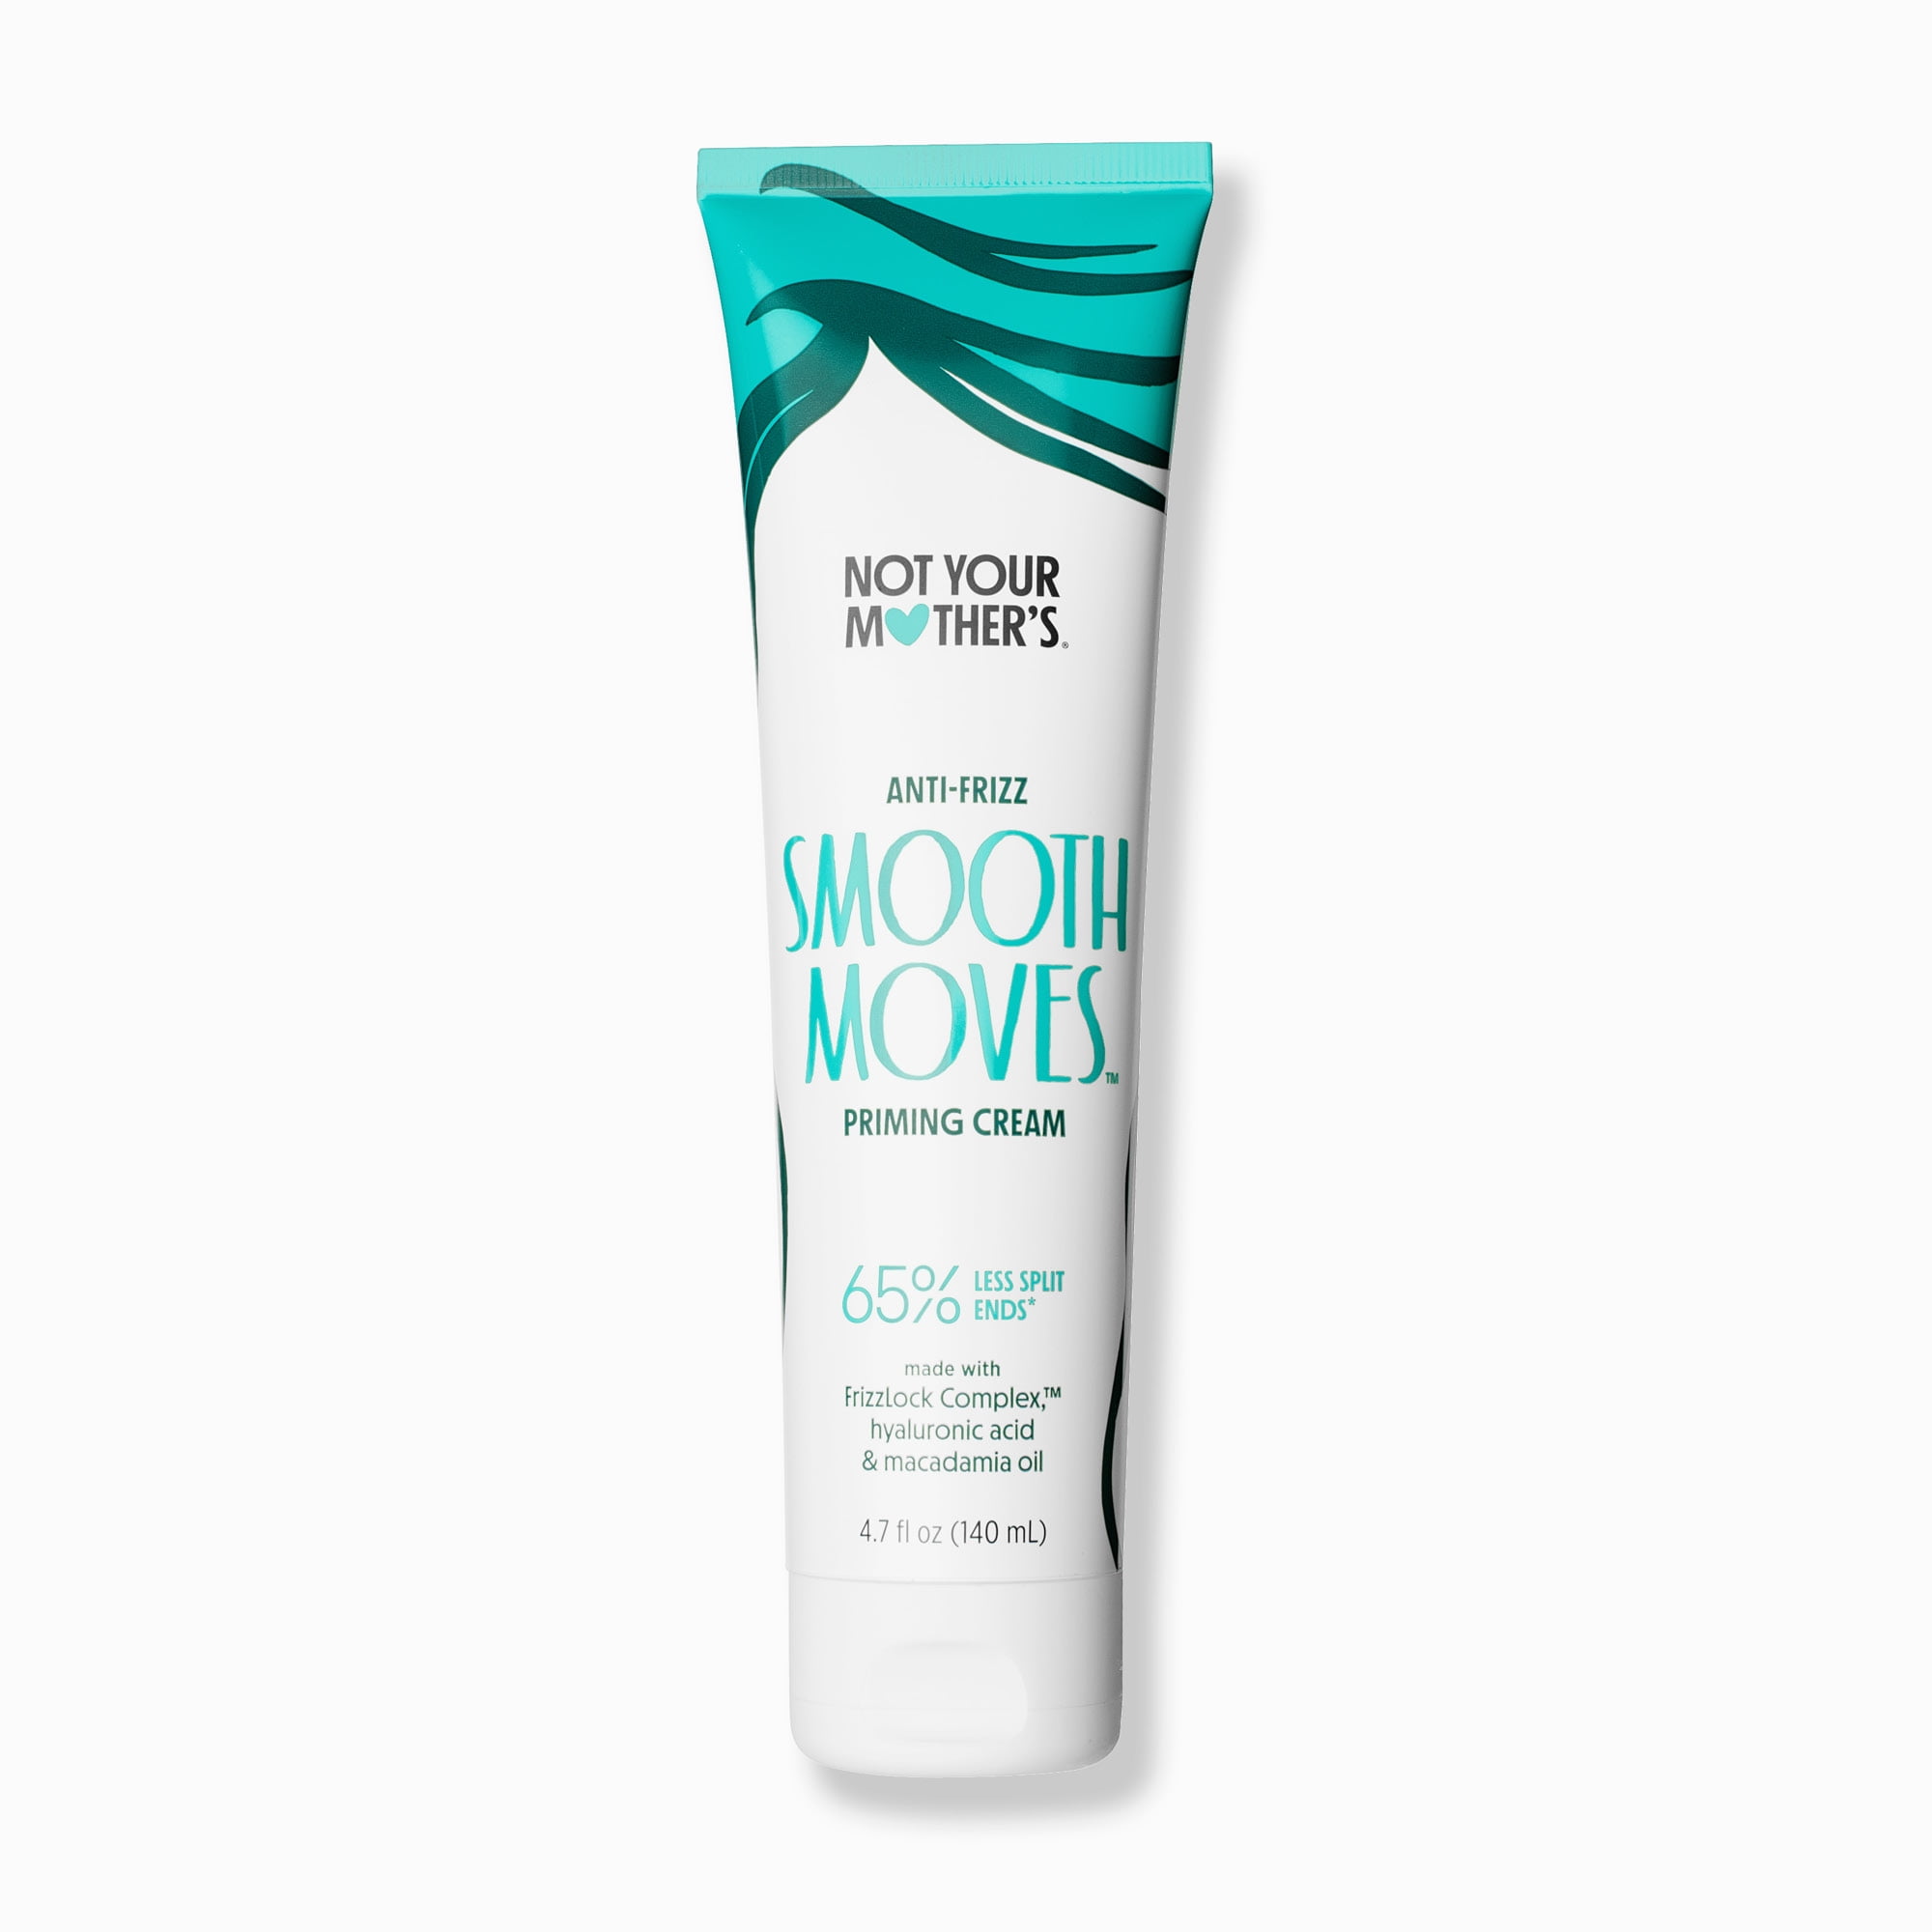 Not Your Mother's Smooth Moves Anti-Frizz Priming Cream, Heat Protector, 4.7 fl oz